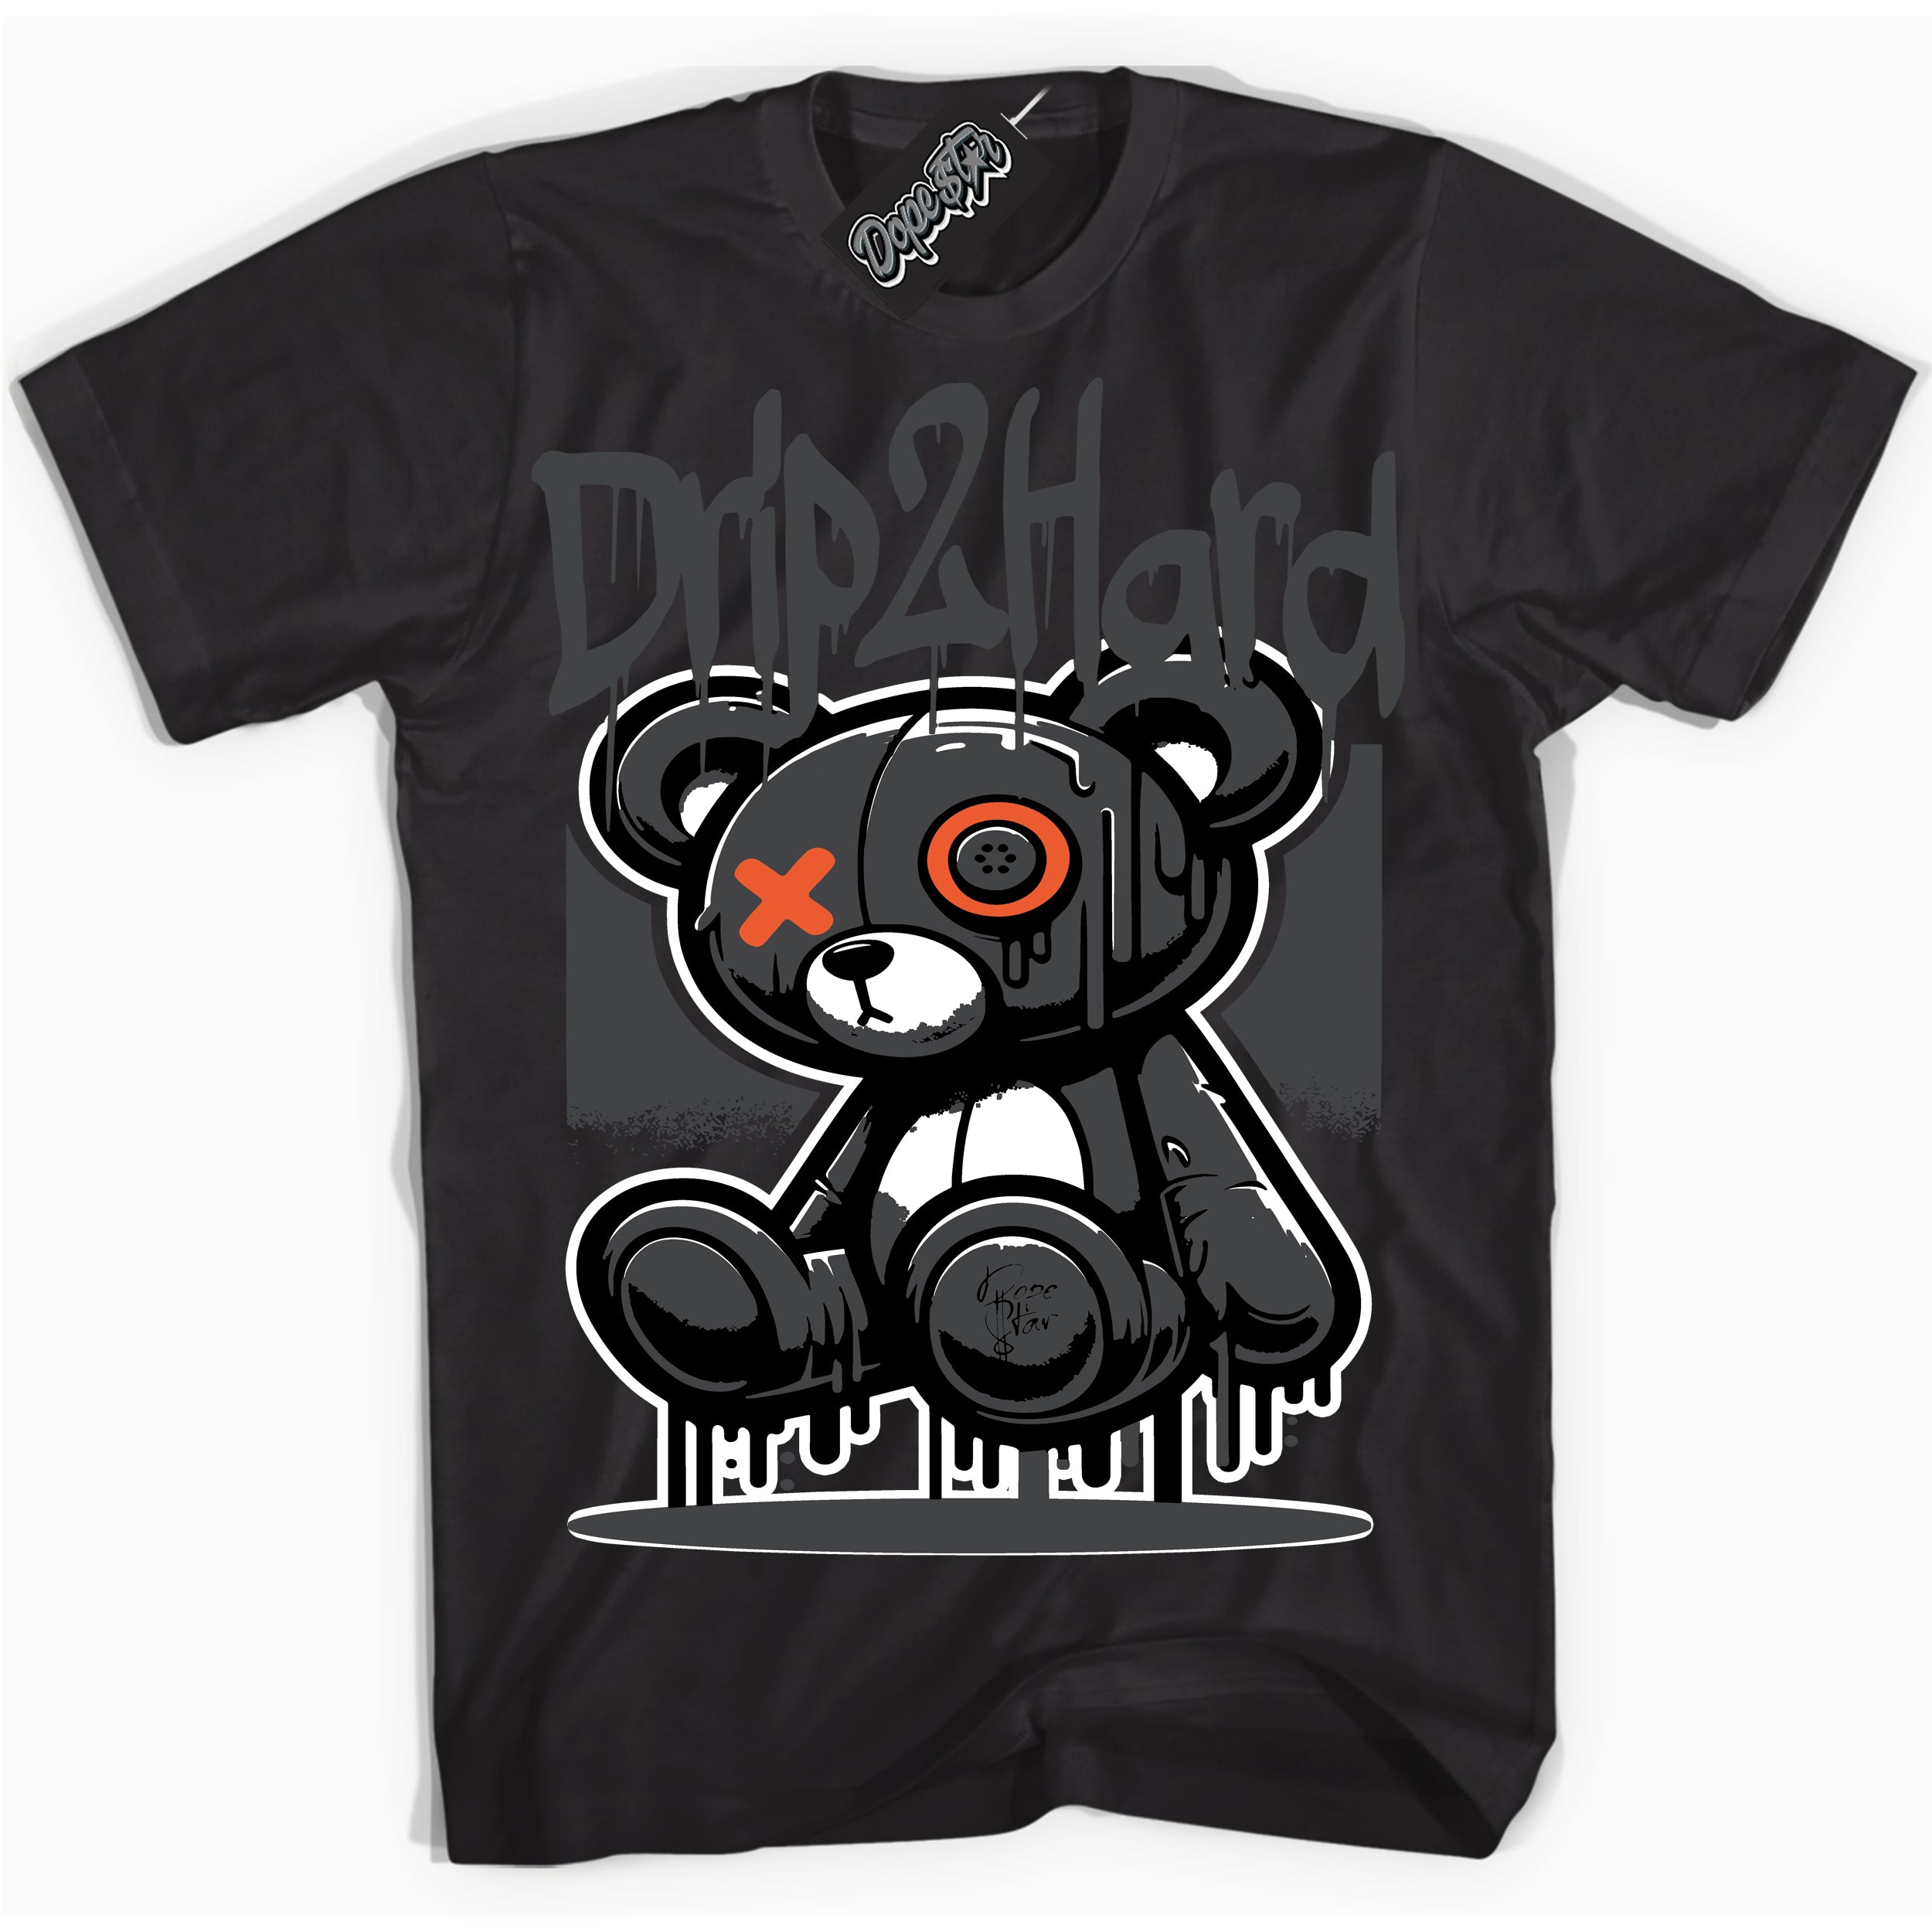 Cool Black graphic tee with “ Drip 2 Hard ” design, that perfectly matches Stash 1s